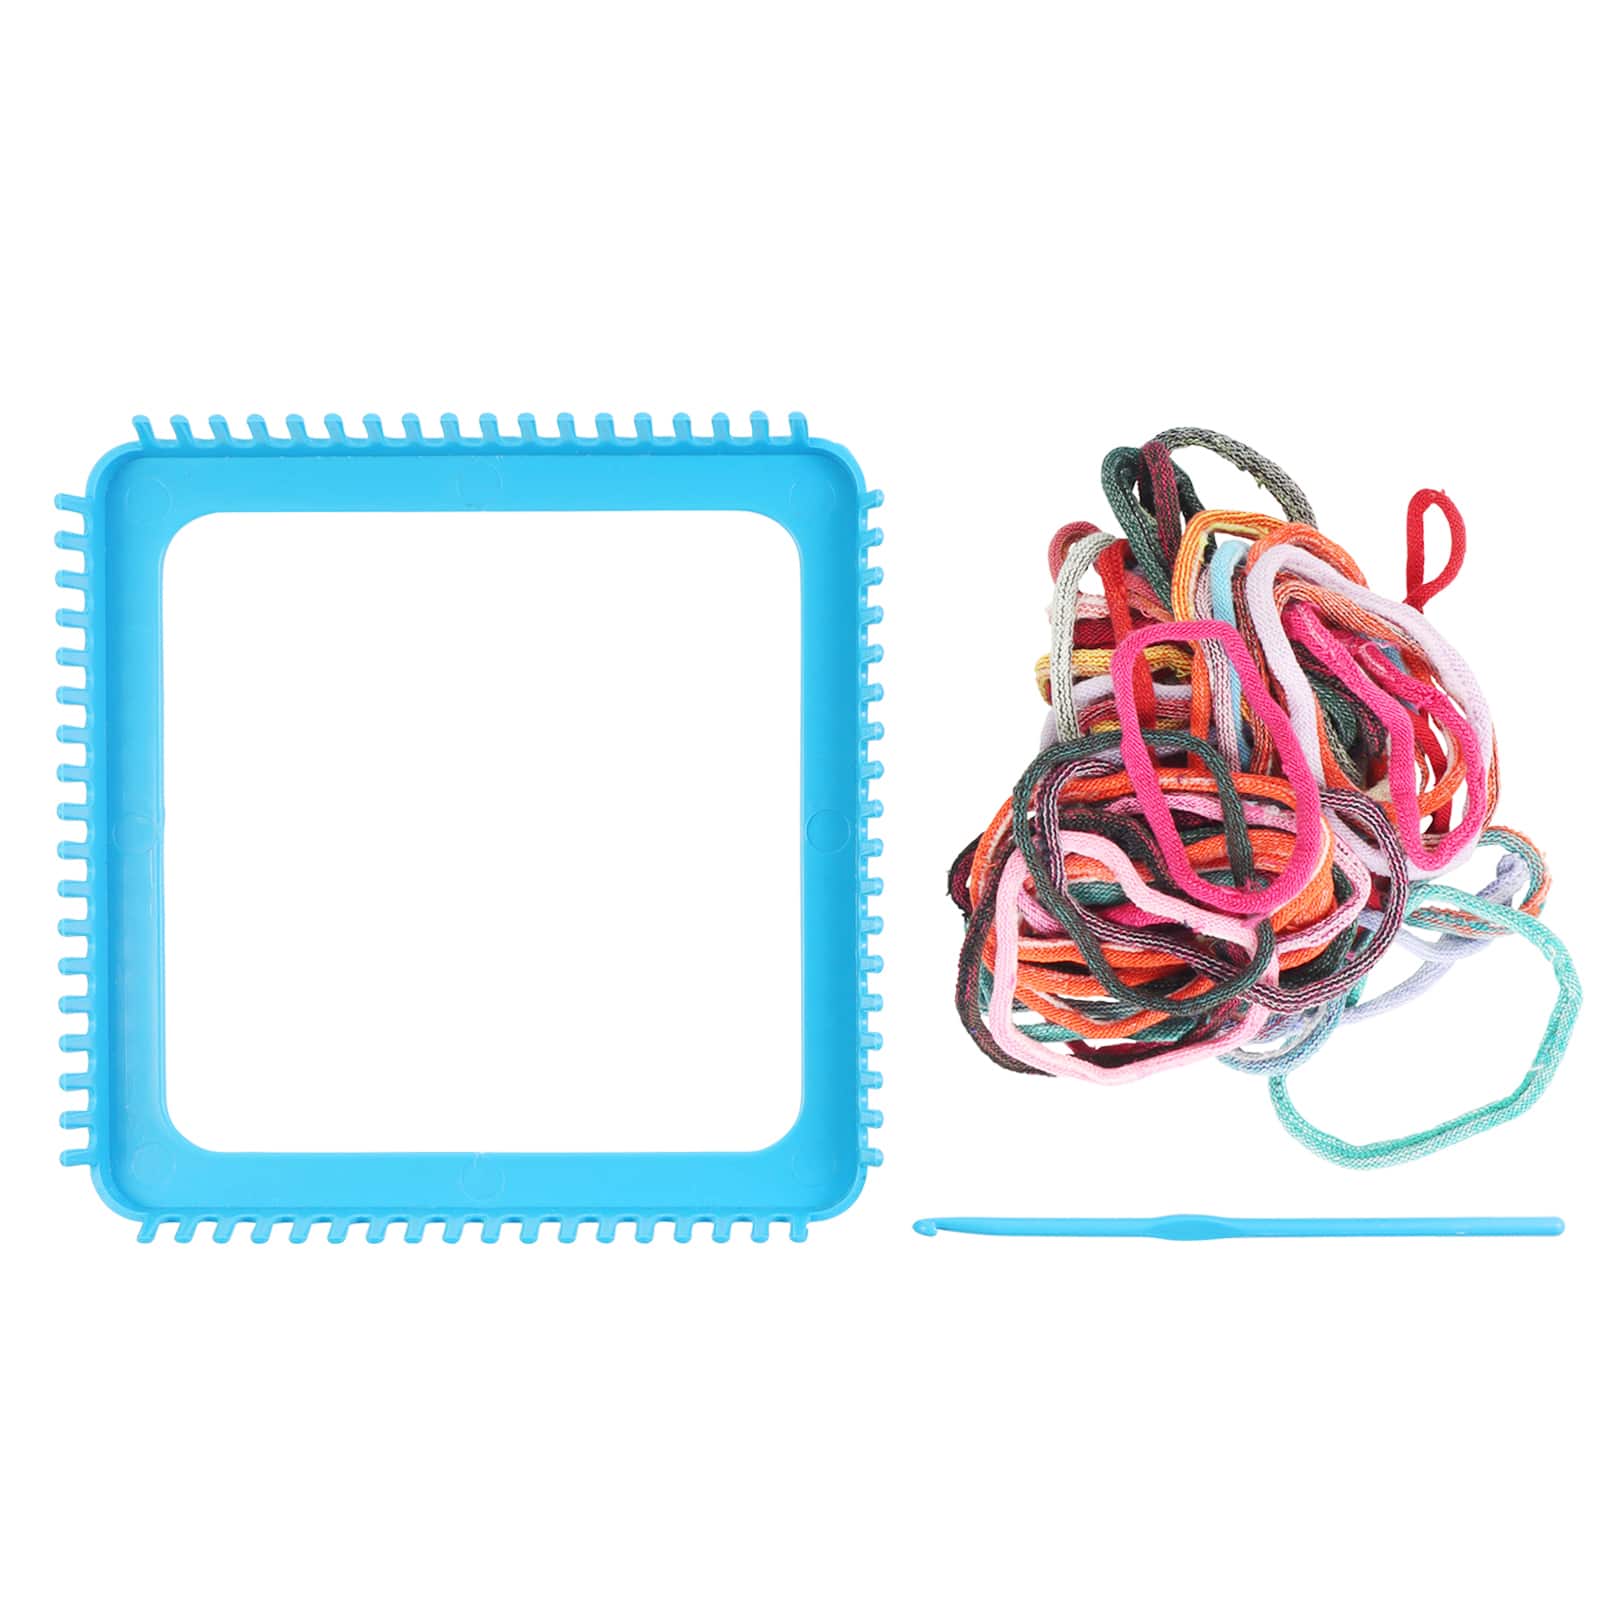 DDAI Weaving Loom Kit Crafts for Kids and Adults - Potholder Loops